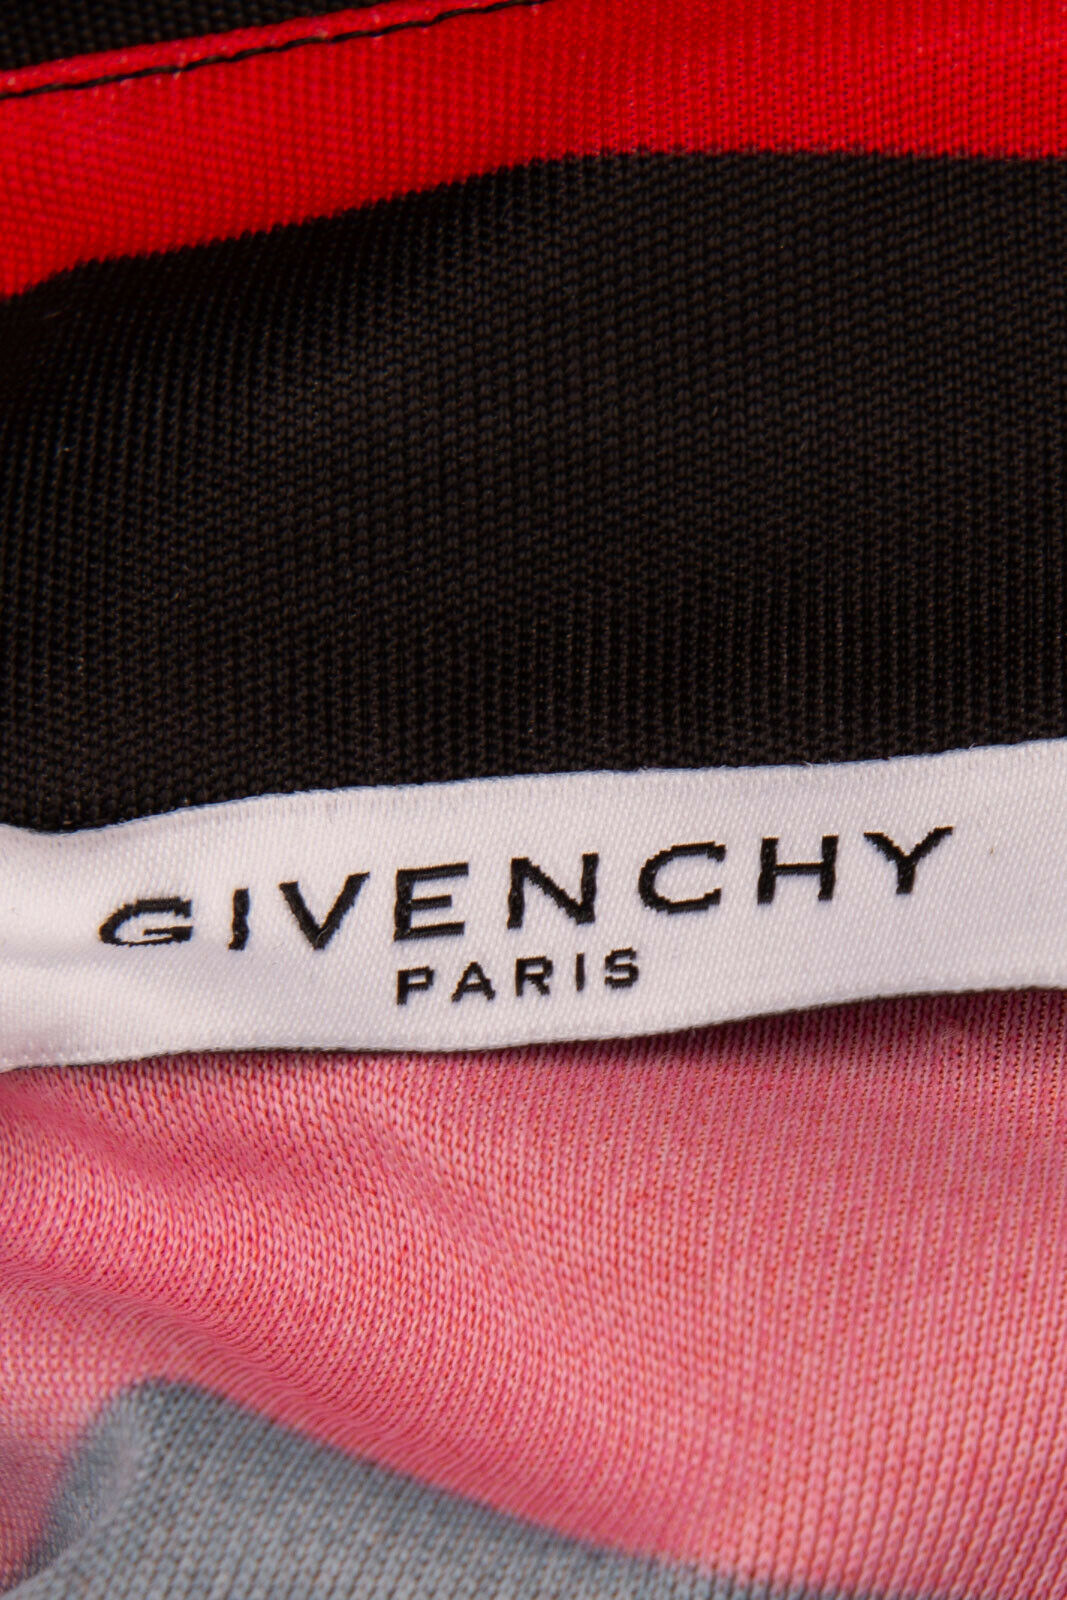 GIVENCHY Top Size 38 Made in Italy